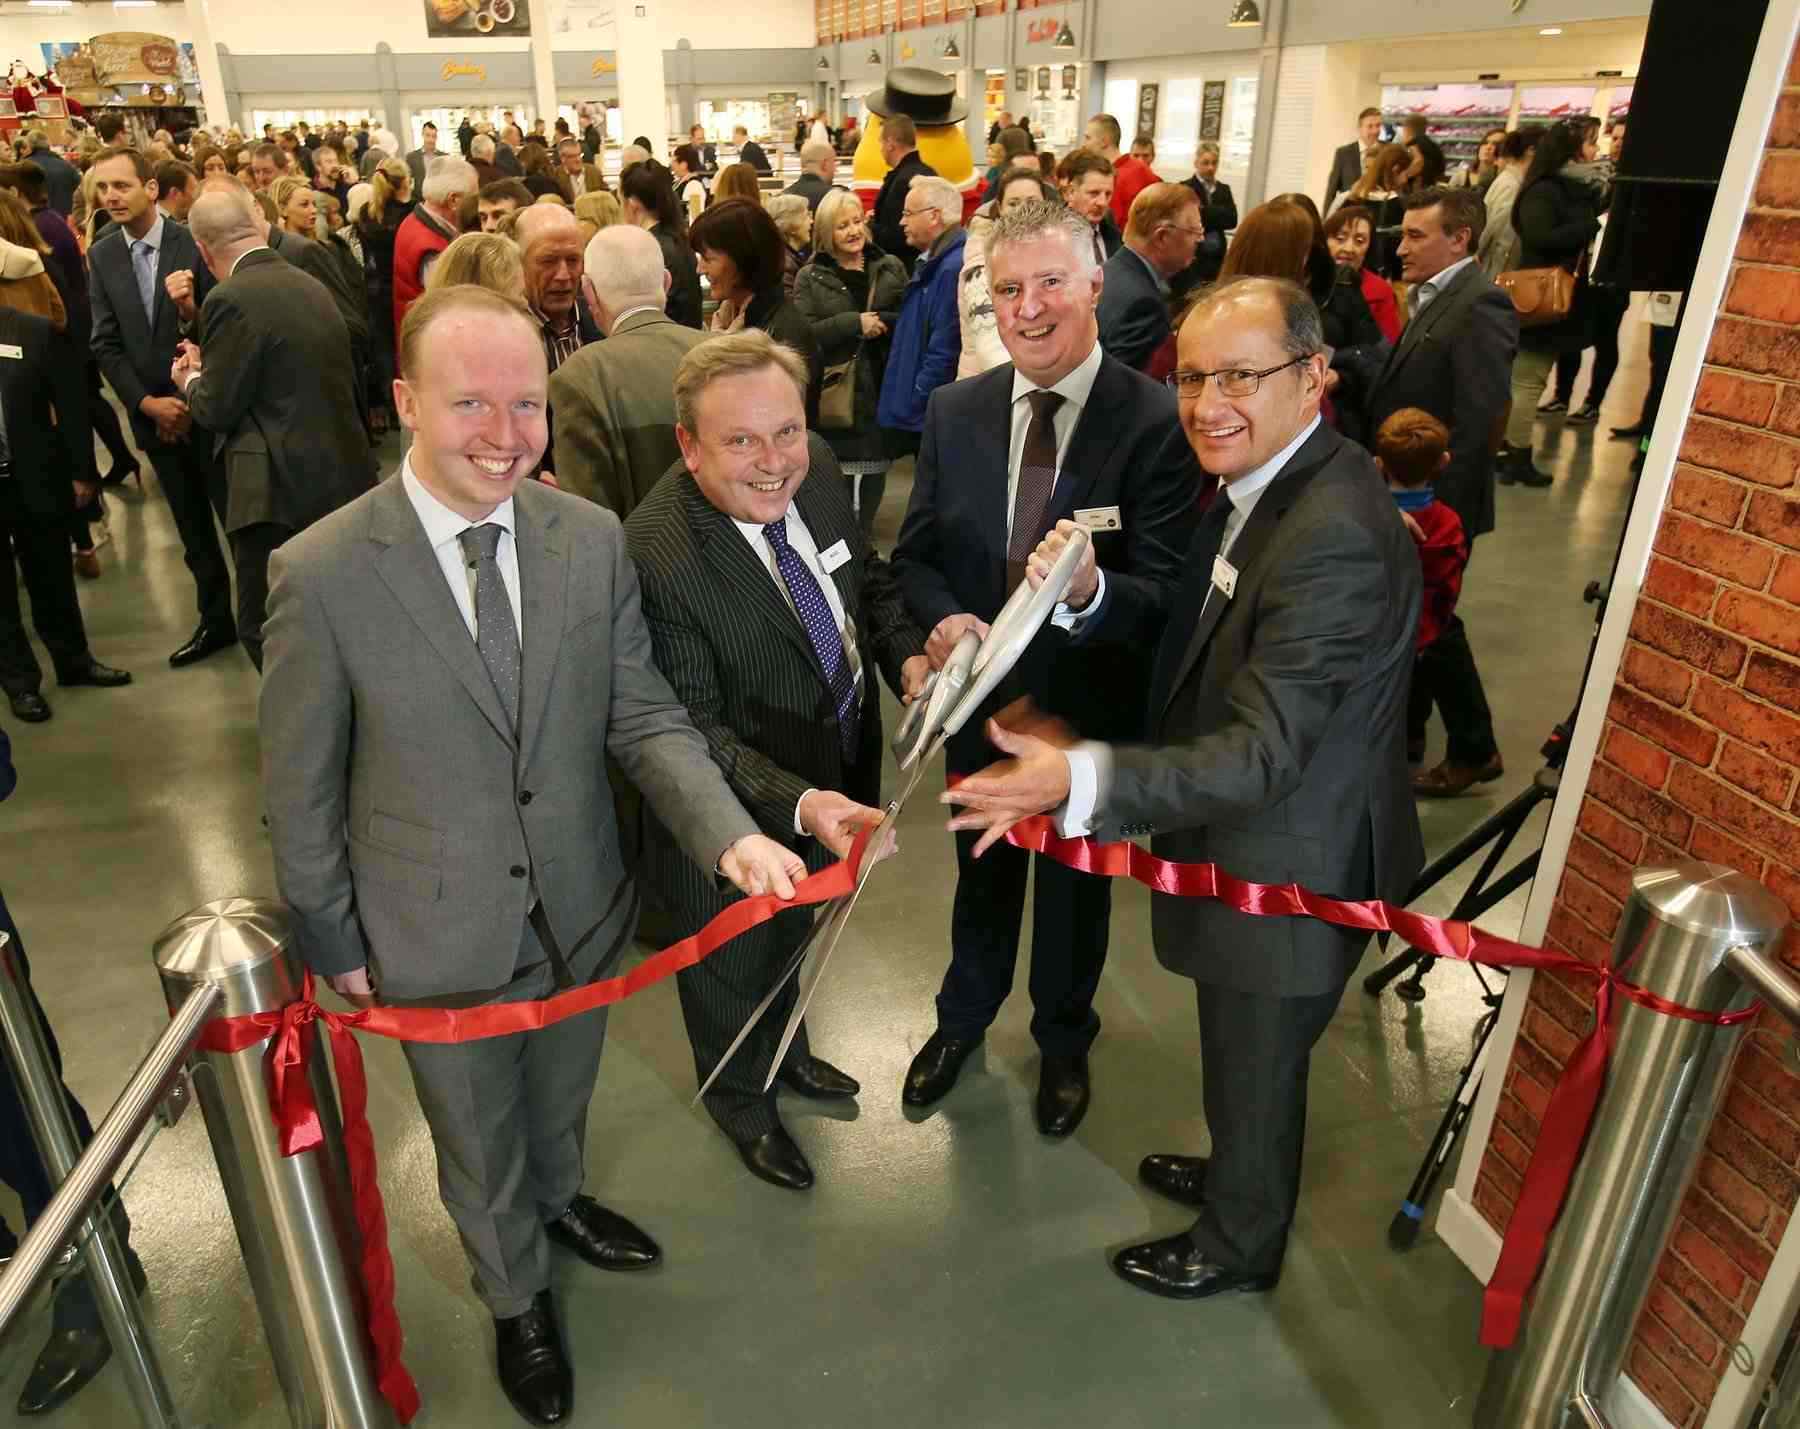 From left: Noel Rock TD for Dublin North West; Musgrave Marketplace’s Managing Director Noel Keeley; General Manager of Musgrave MarketPlace, Ballymun, Brian Staunton and Chris Martin, Chief Executive of Musgrave Group, at the launch of the upgraded Ballymun Musgrave MarketPlace.